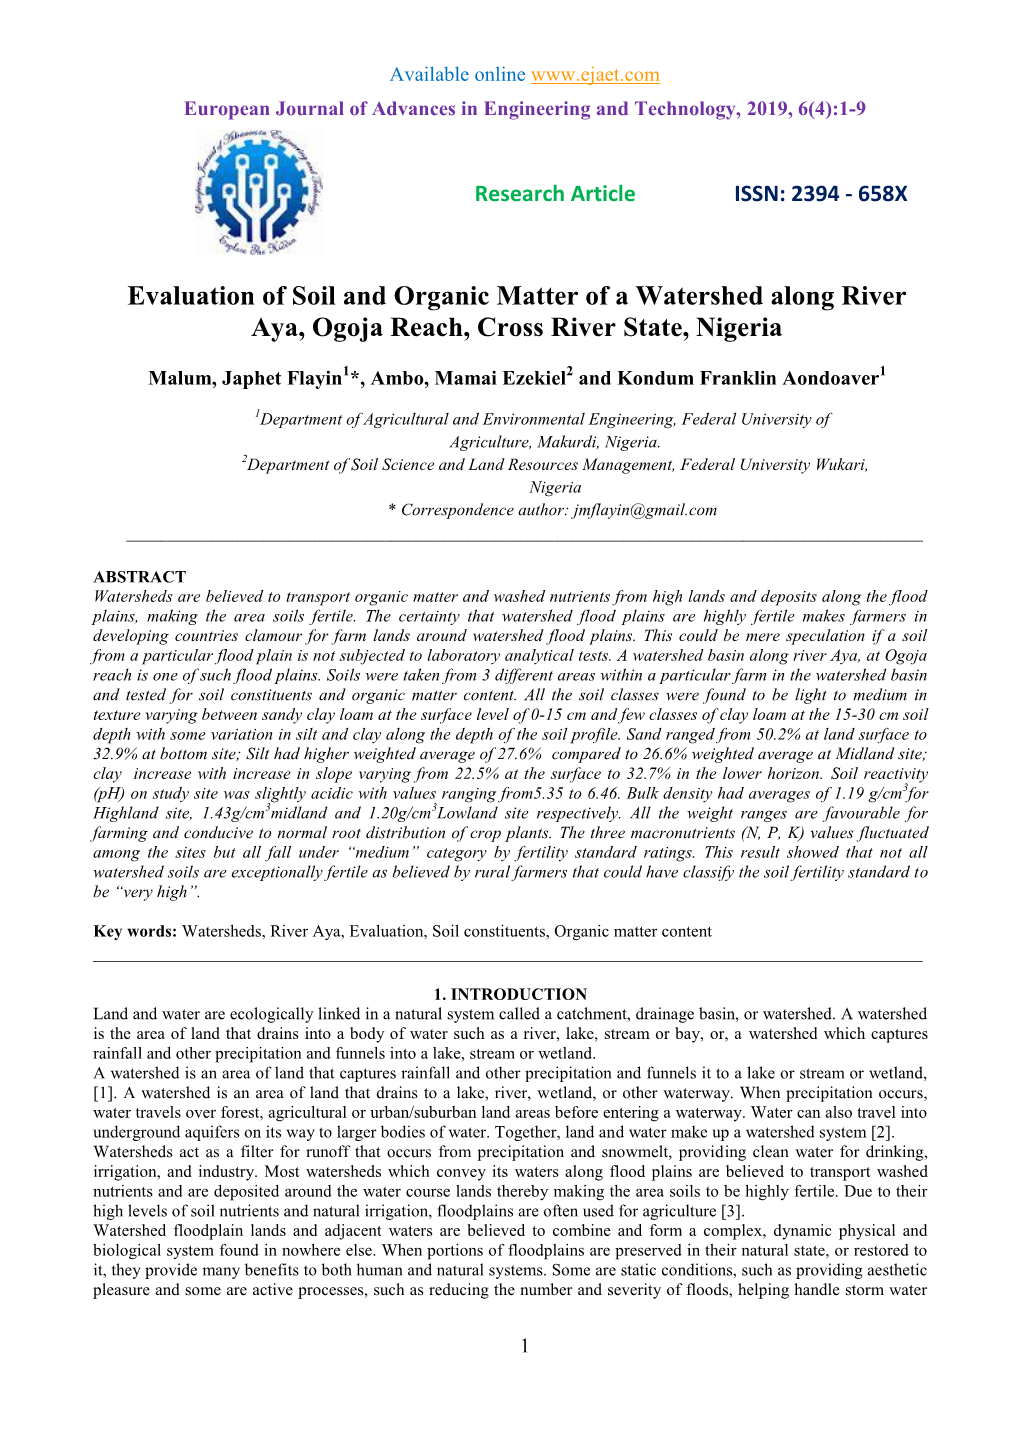 Some Evaluation of Soil and Organic Matter of a Watershed